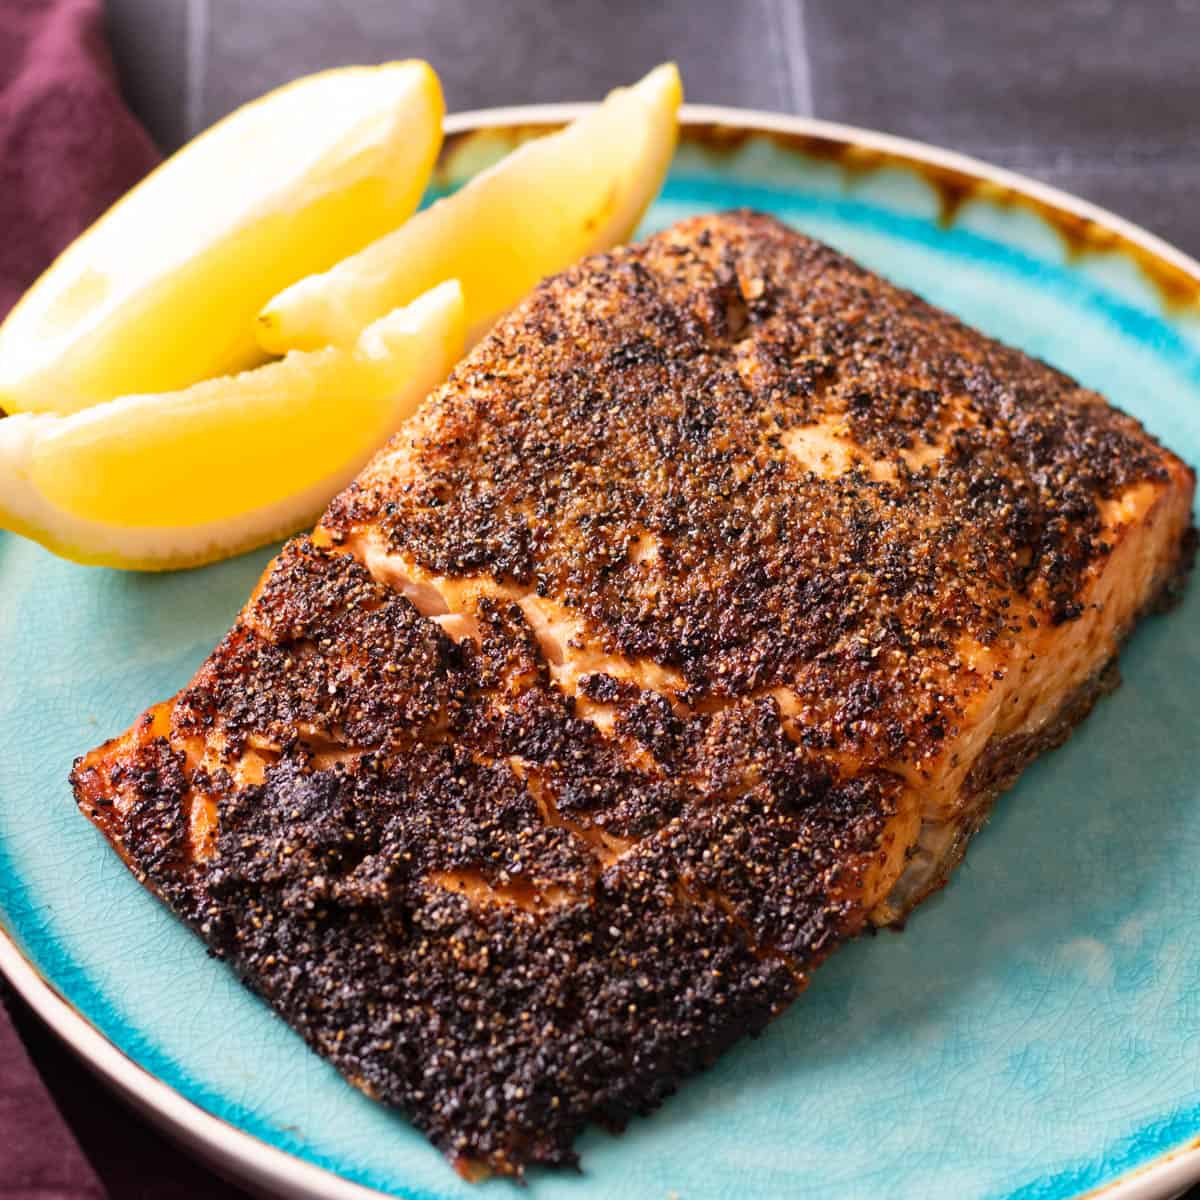 Air fryer salmon with skin.